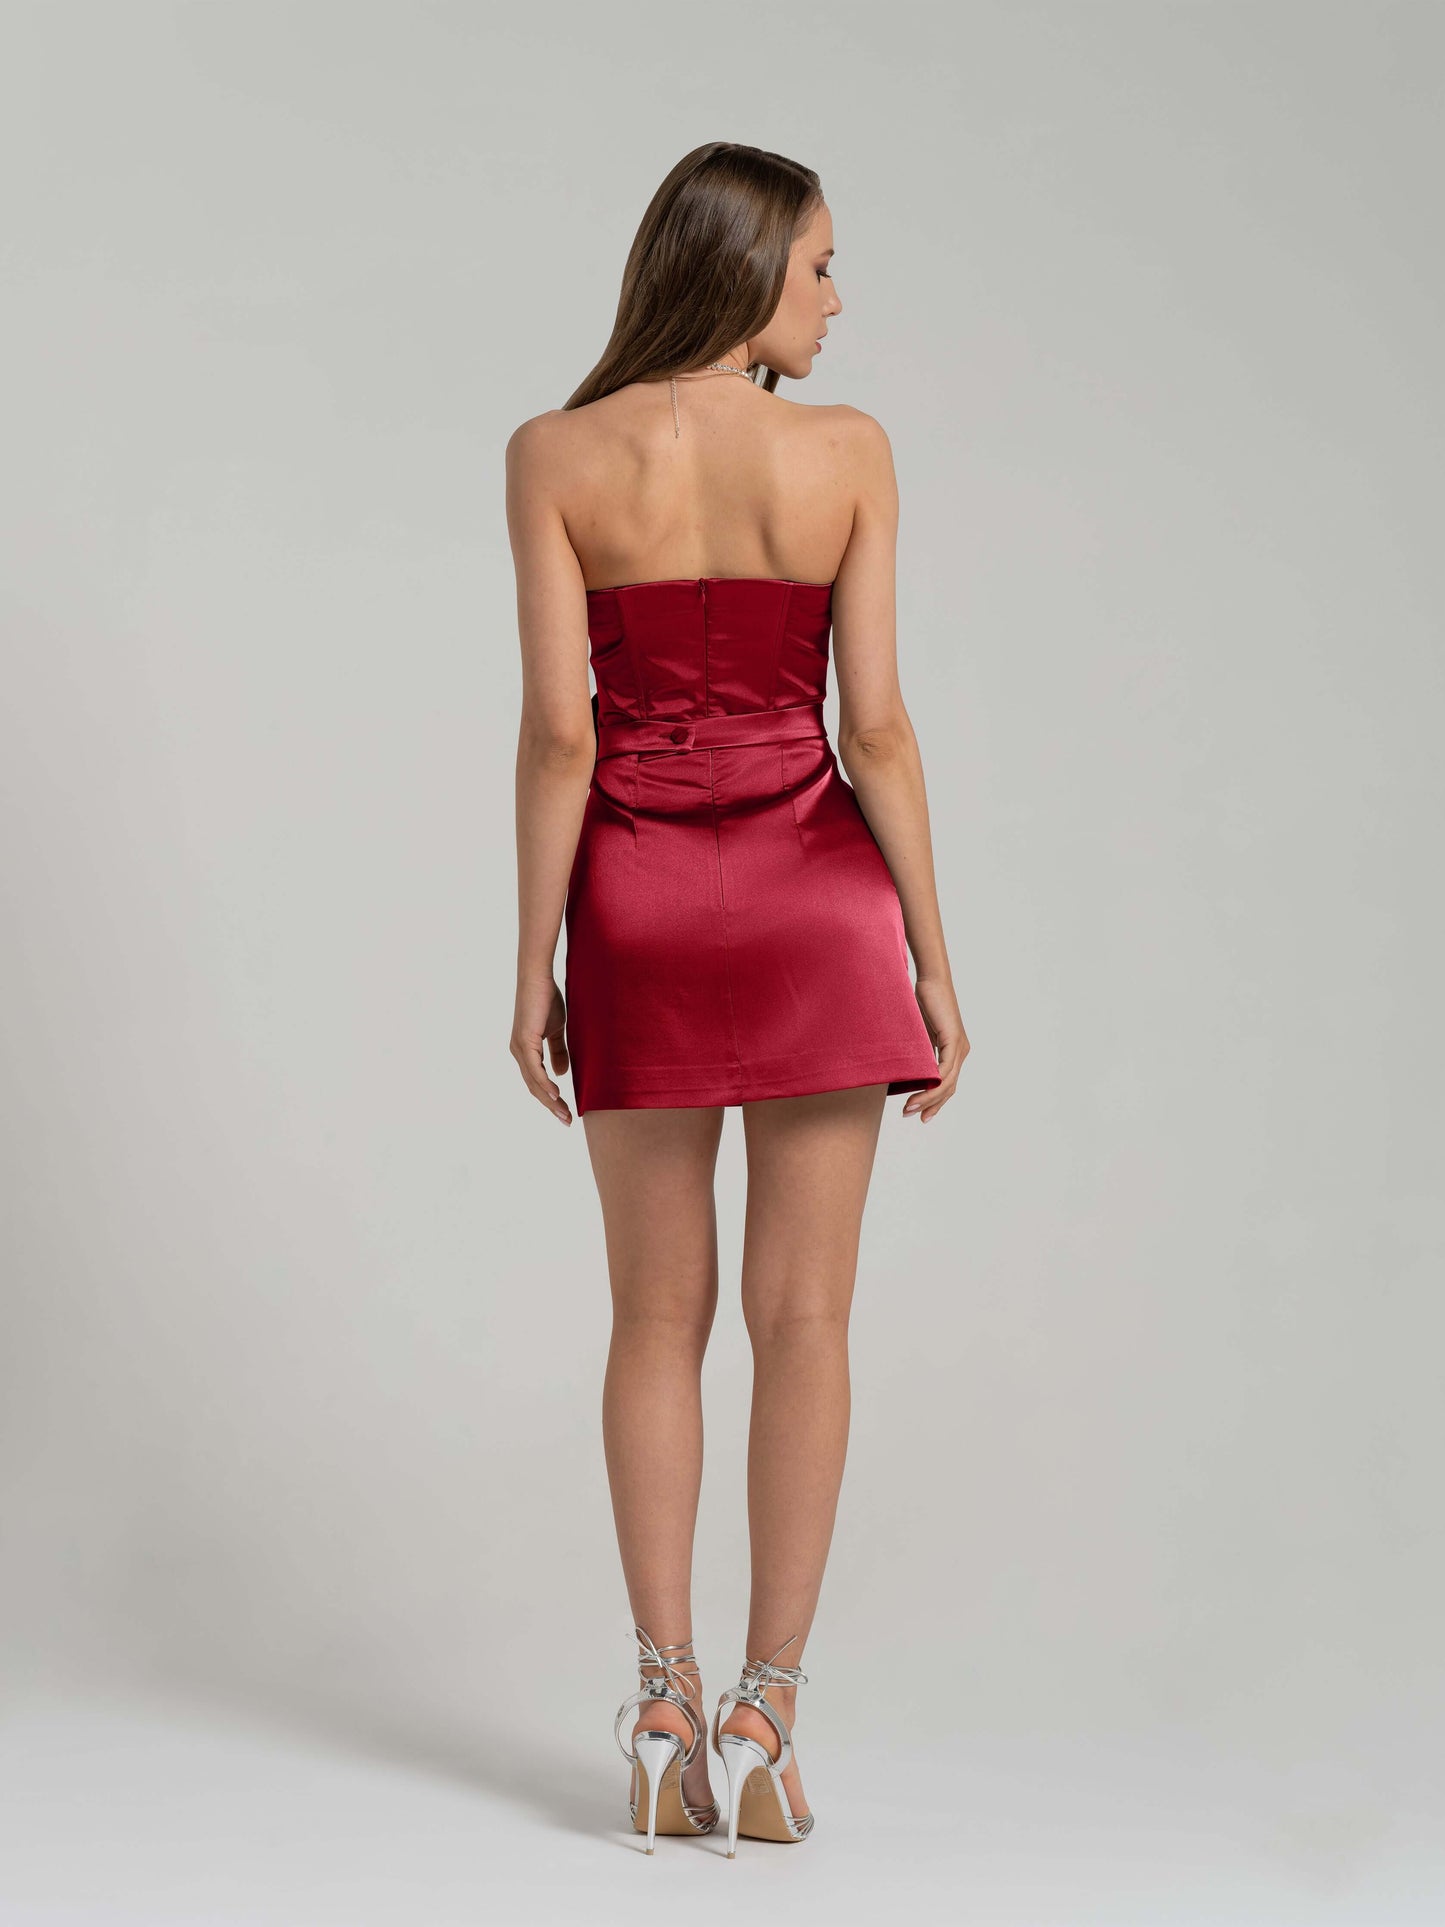 Dazzling Touch Satin Mini Dress - Red